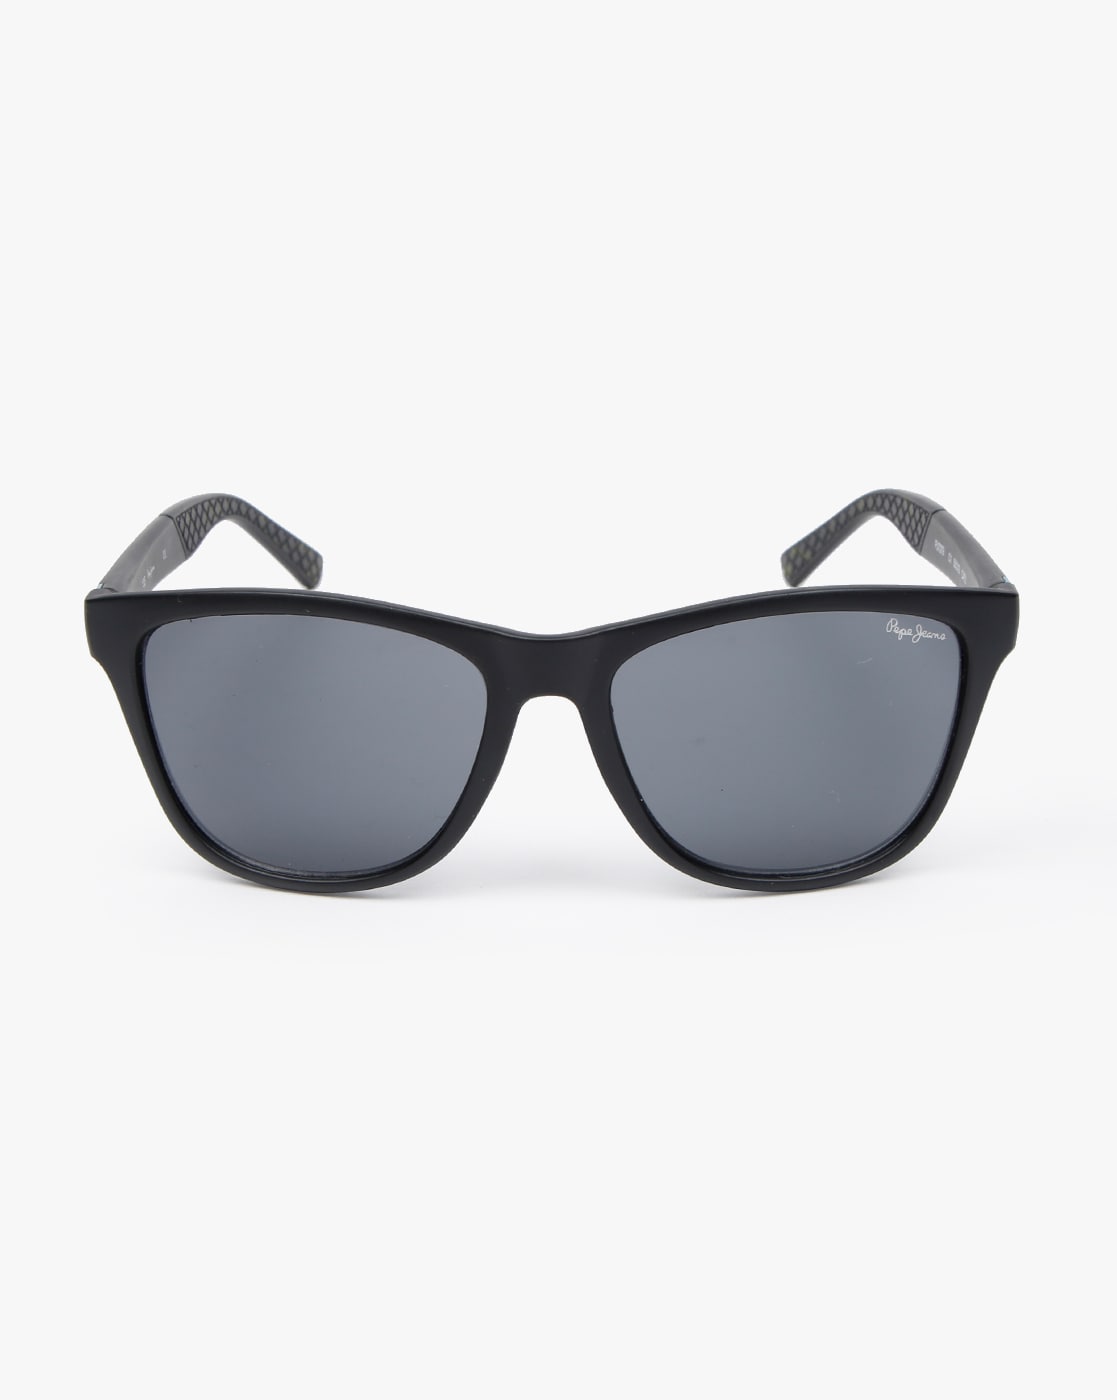 Black Sunglasses for Men by Pepe Jeans 